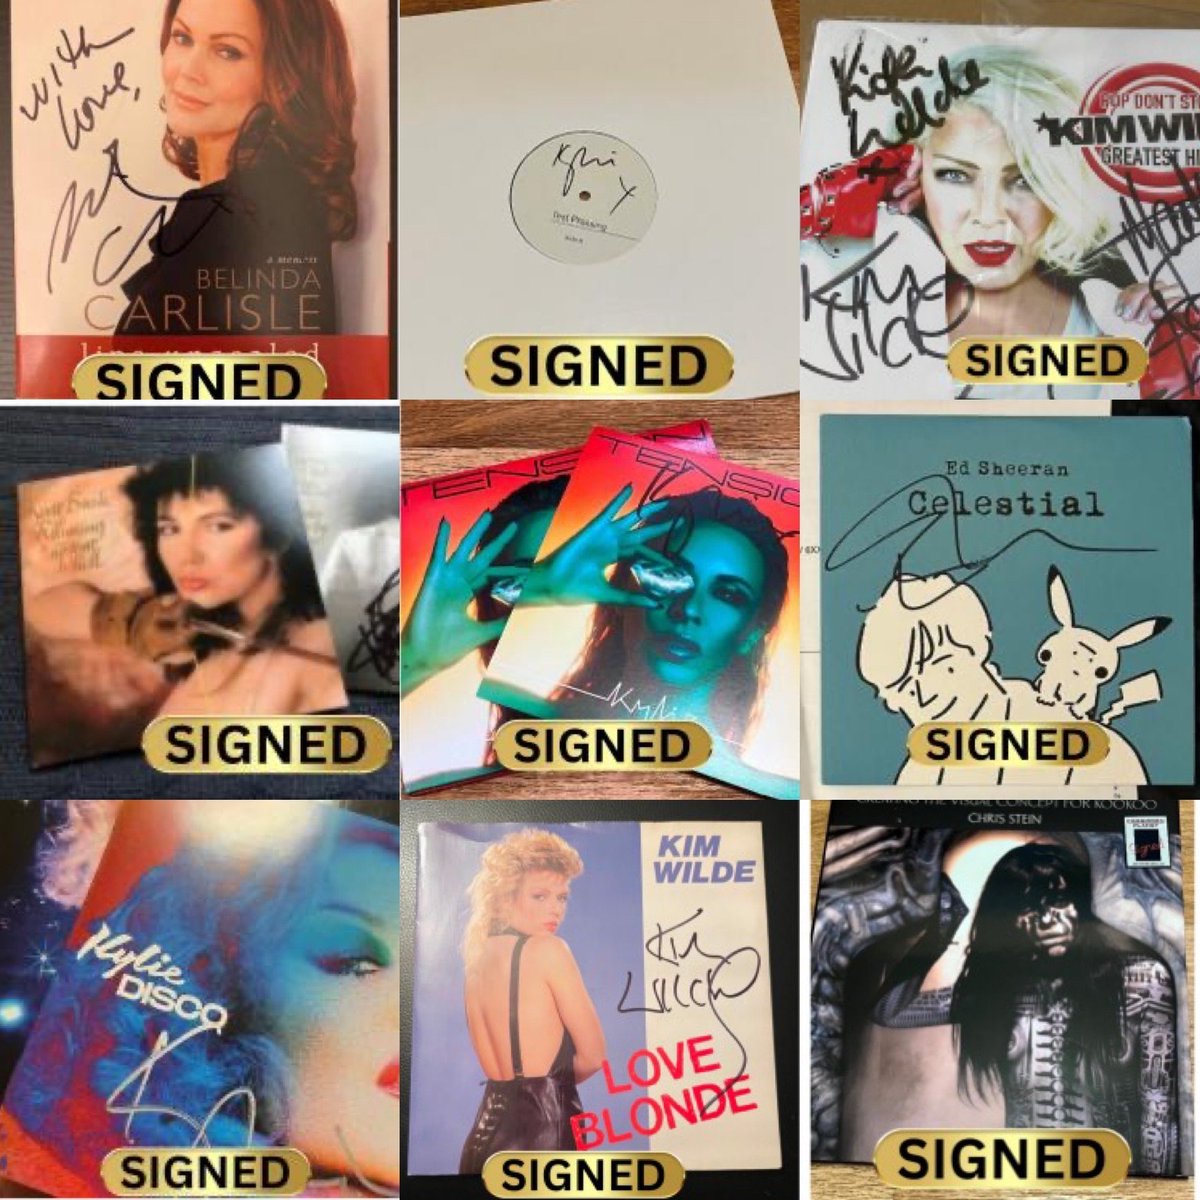 David Bowie sang “Let’s Dance” and we’ve many a record fit for the dancefloor over at the 2024 Music Auction from @davecrossx for @cabaretvscancer

ENDS SUNDAY!

jumblebee.co.uk/music24

❤️Autographs
Vinyl 🎧
🎤 Rare
And lots more 🎶

#charity #recordcollector #kylie #bowie